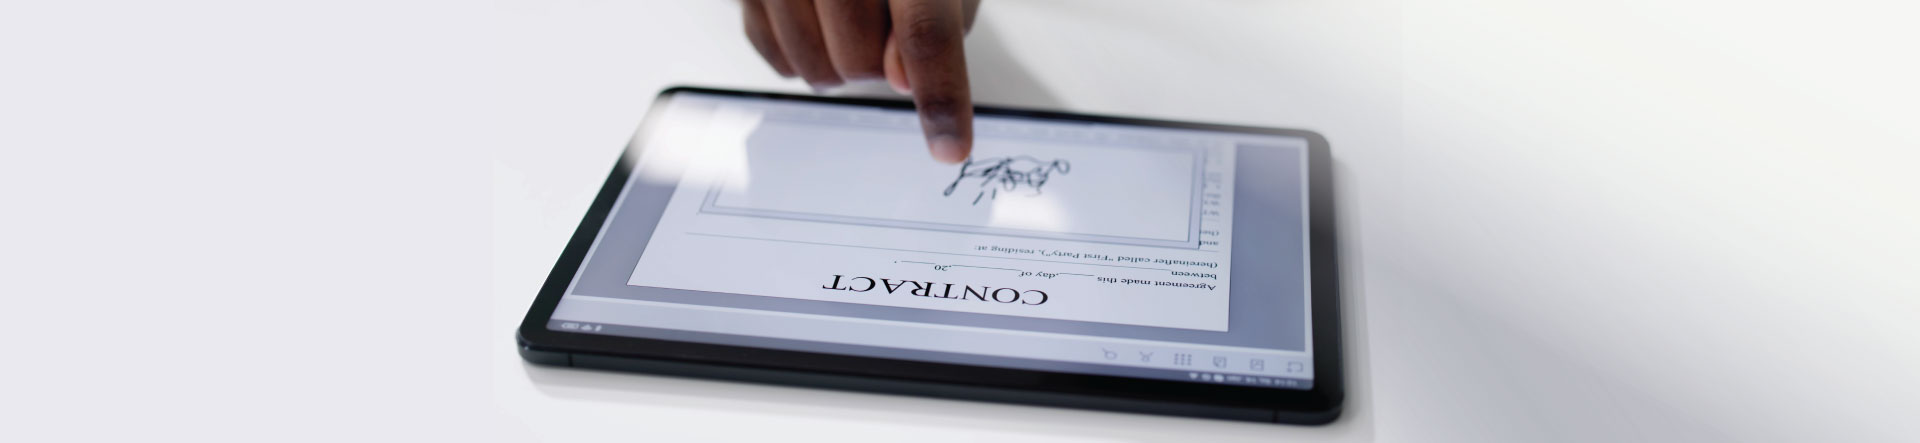 Cyber security - person signing a legal contract electronically on a tablet